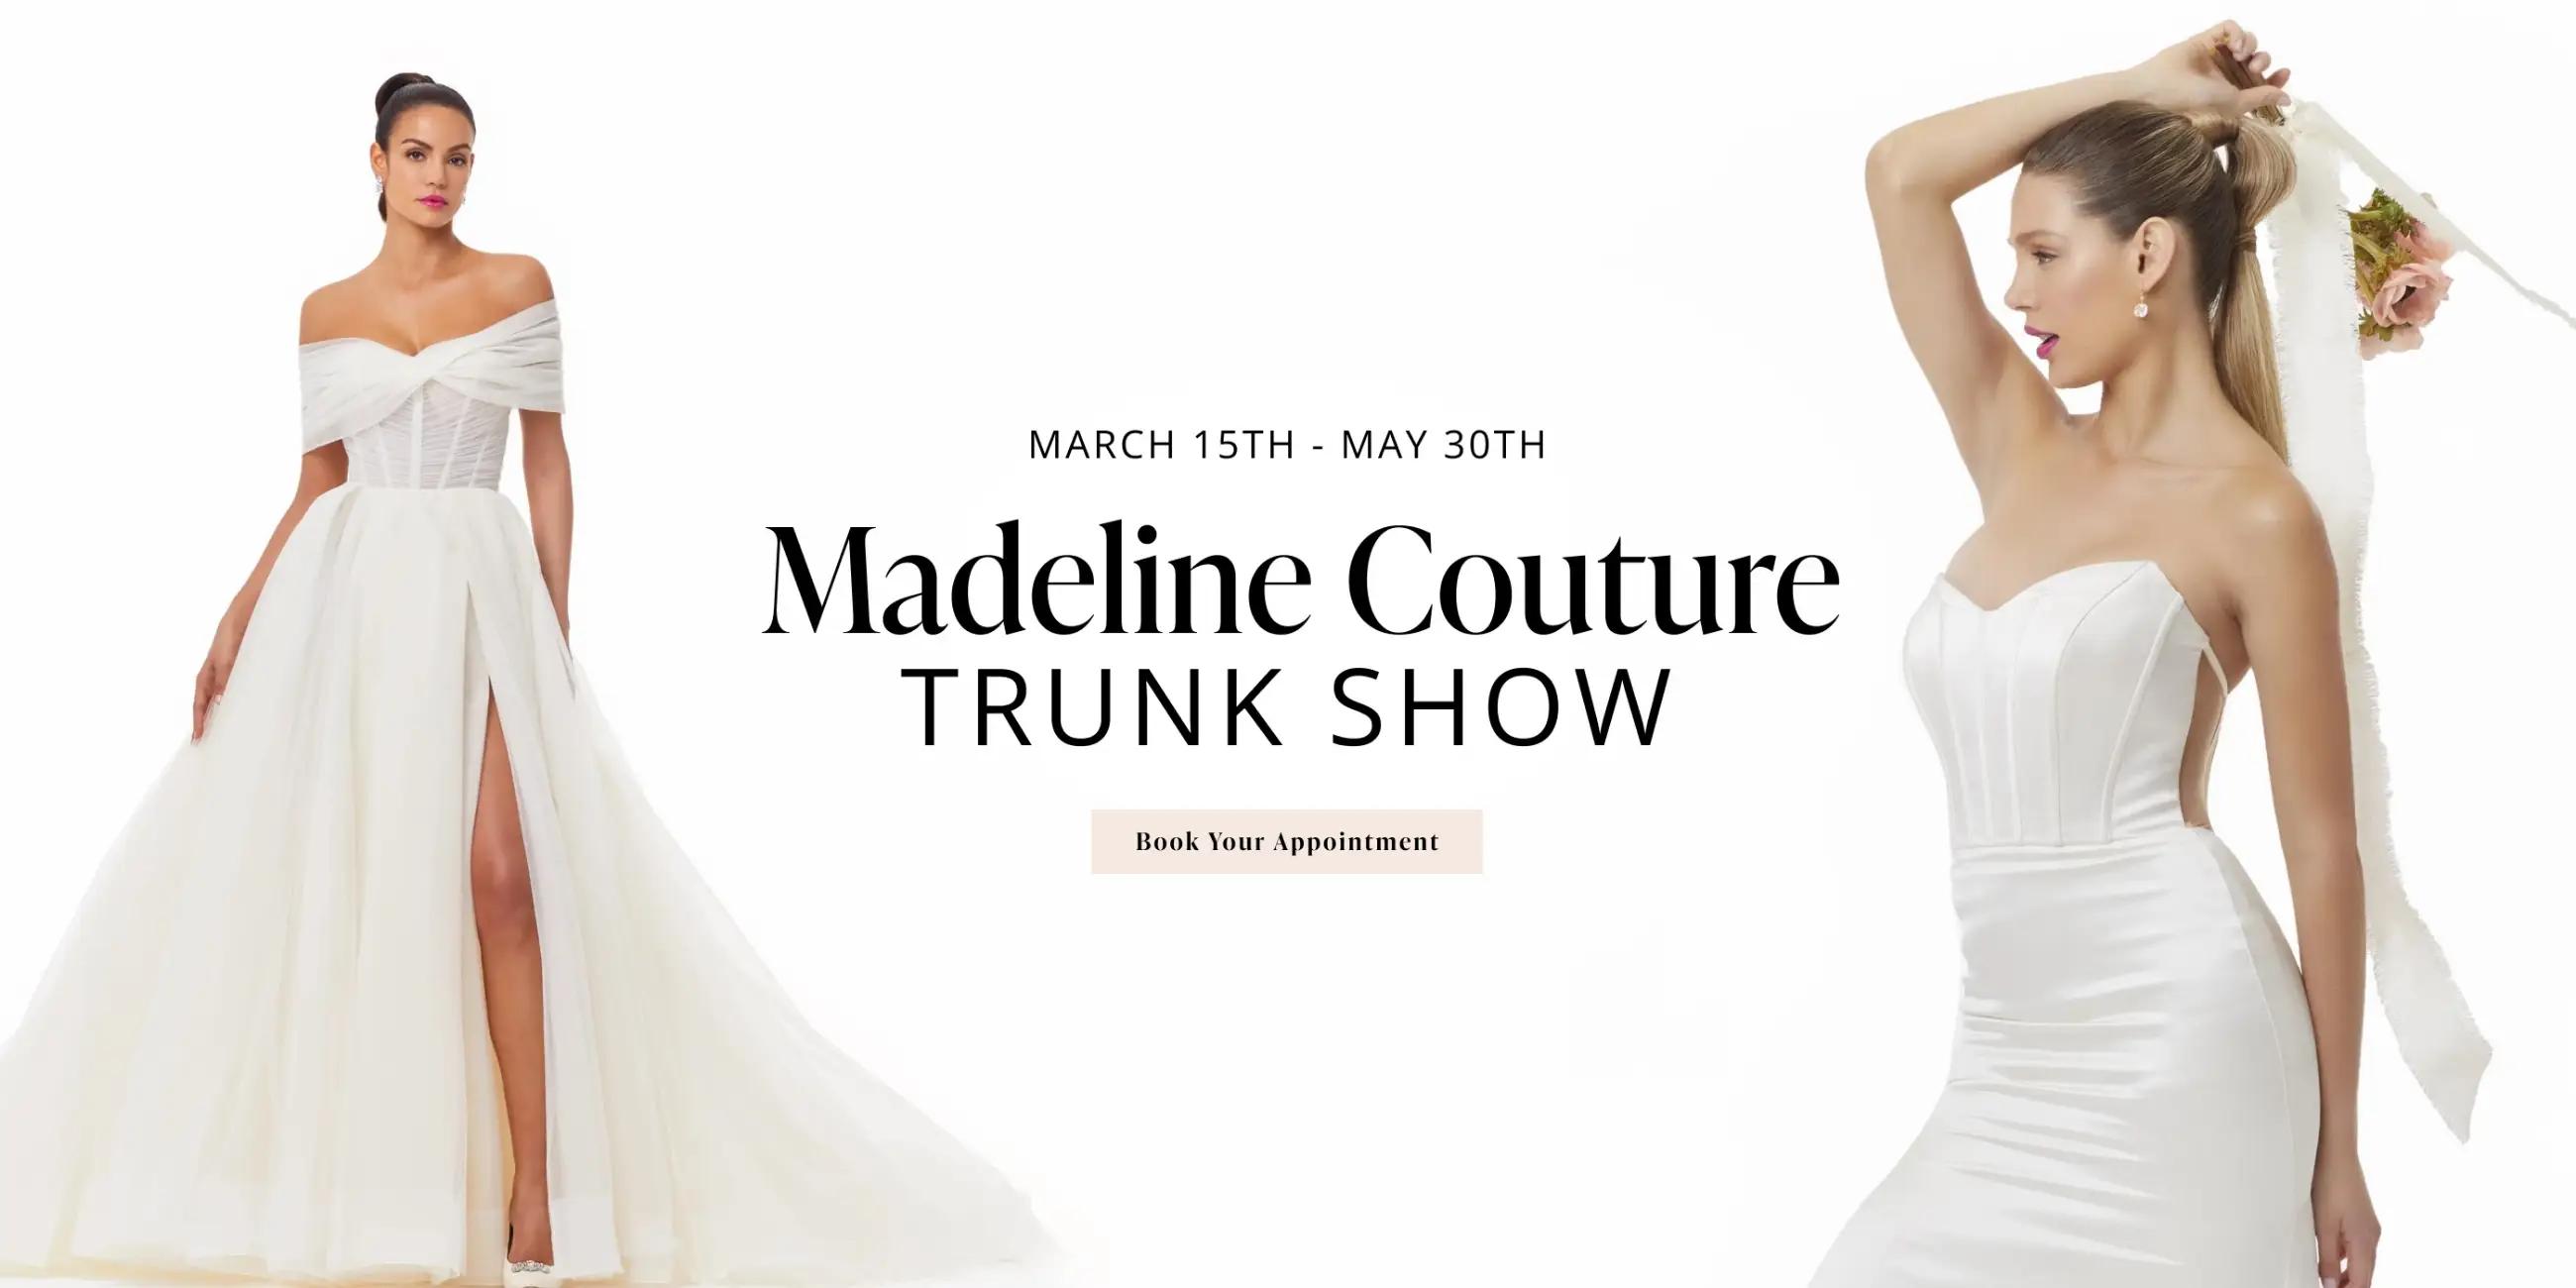 Madeline Couture Trunk Show Banner